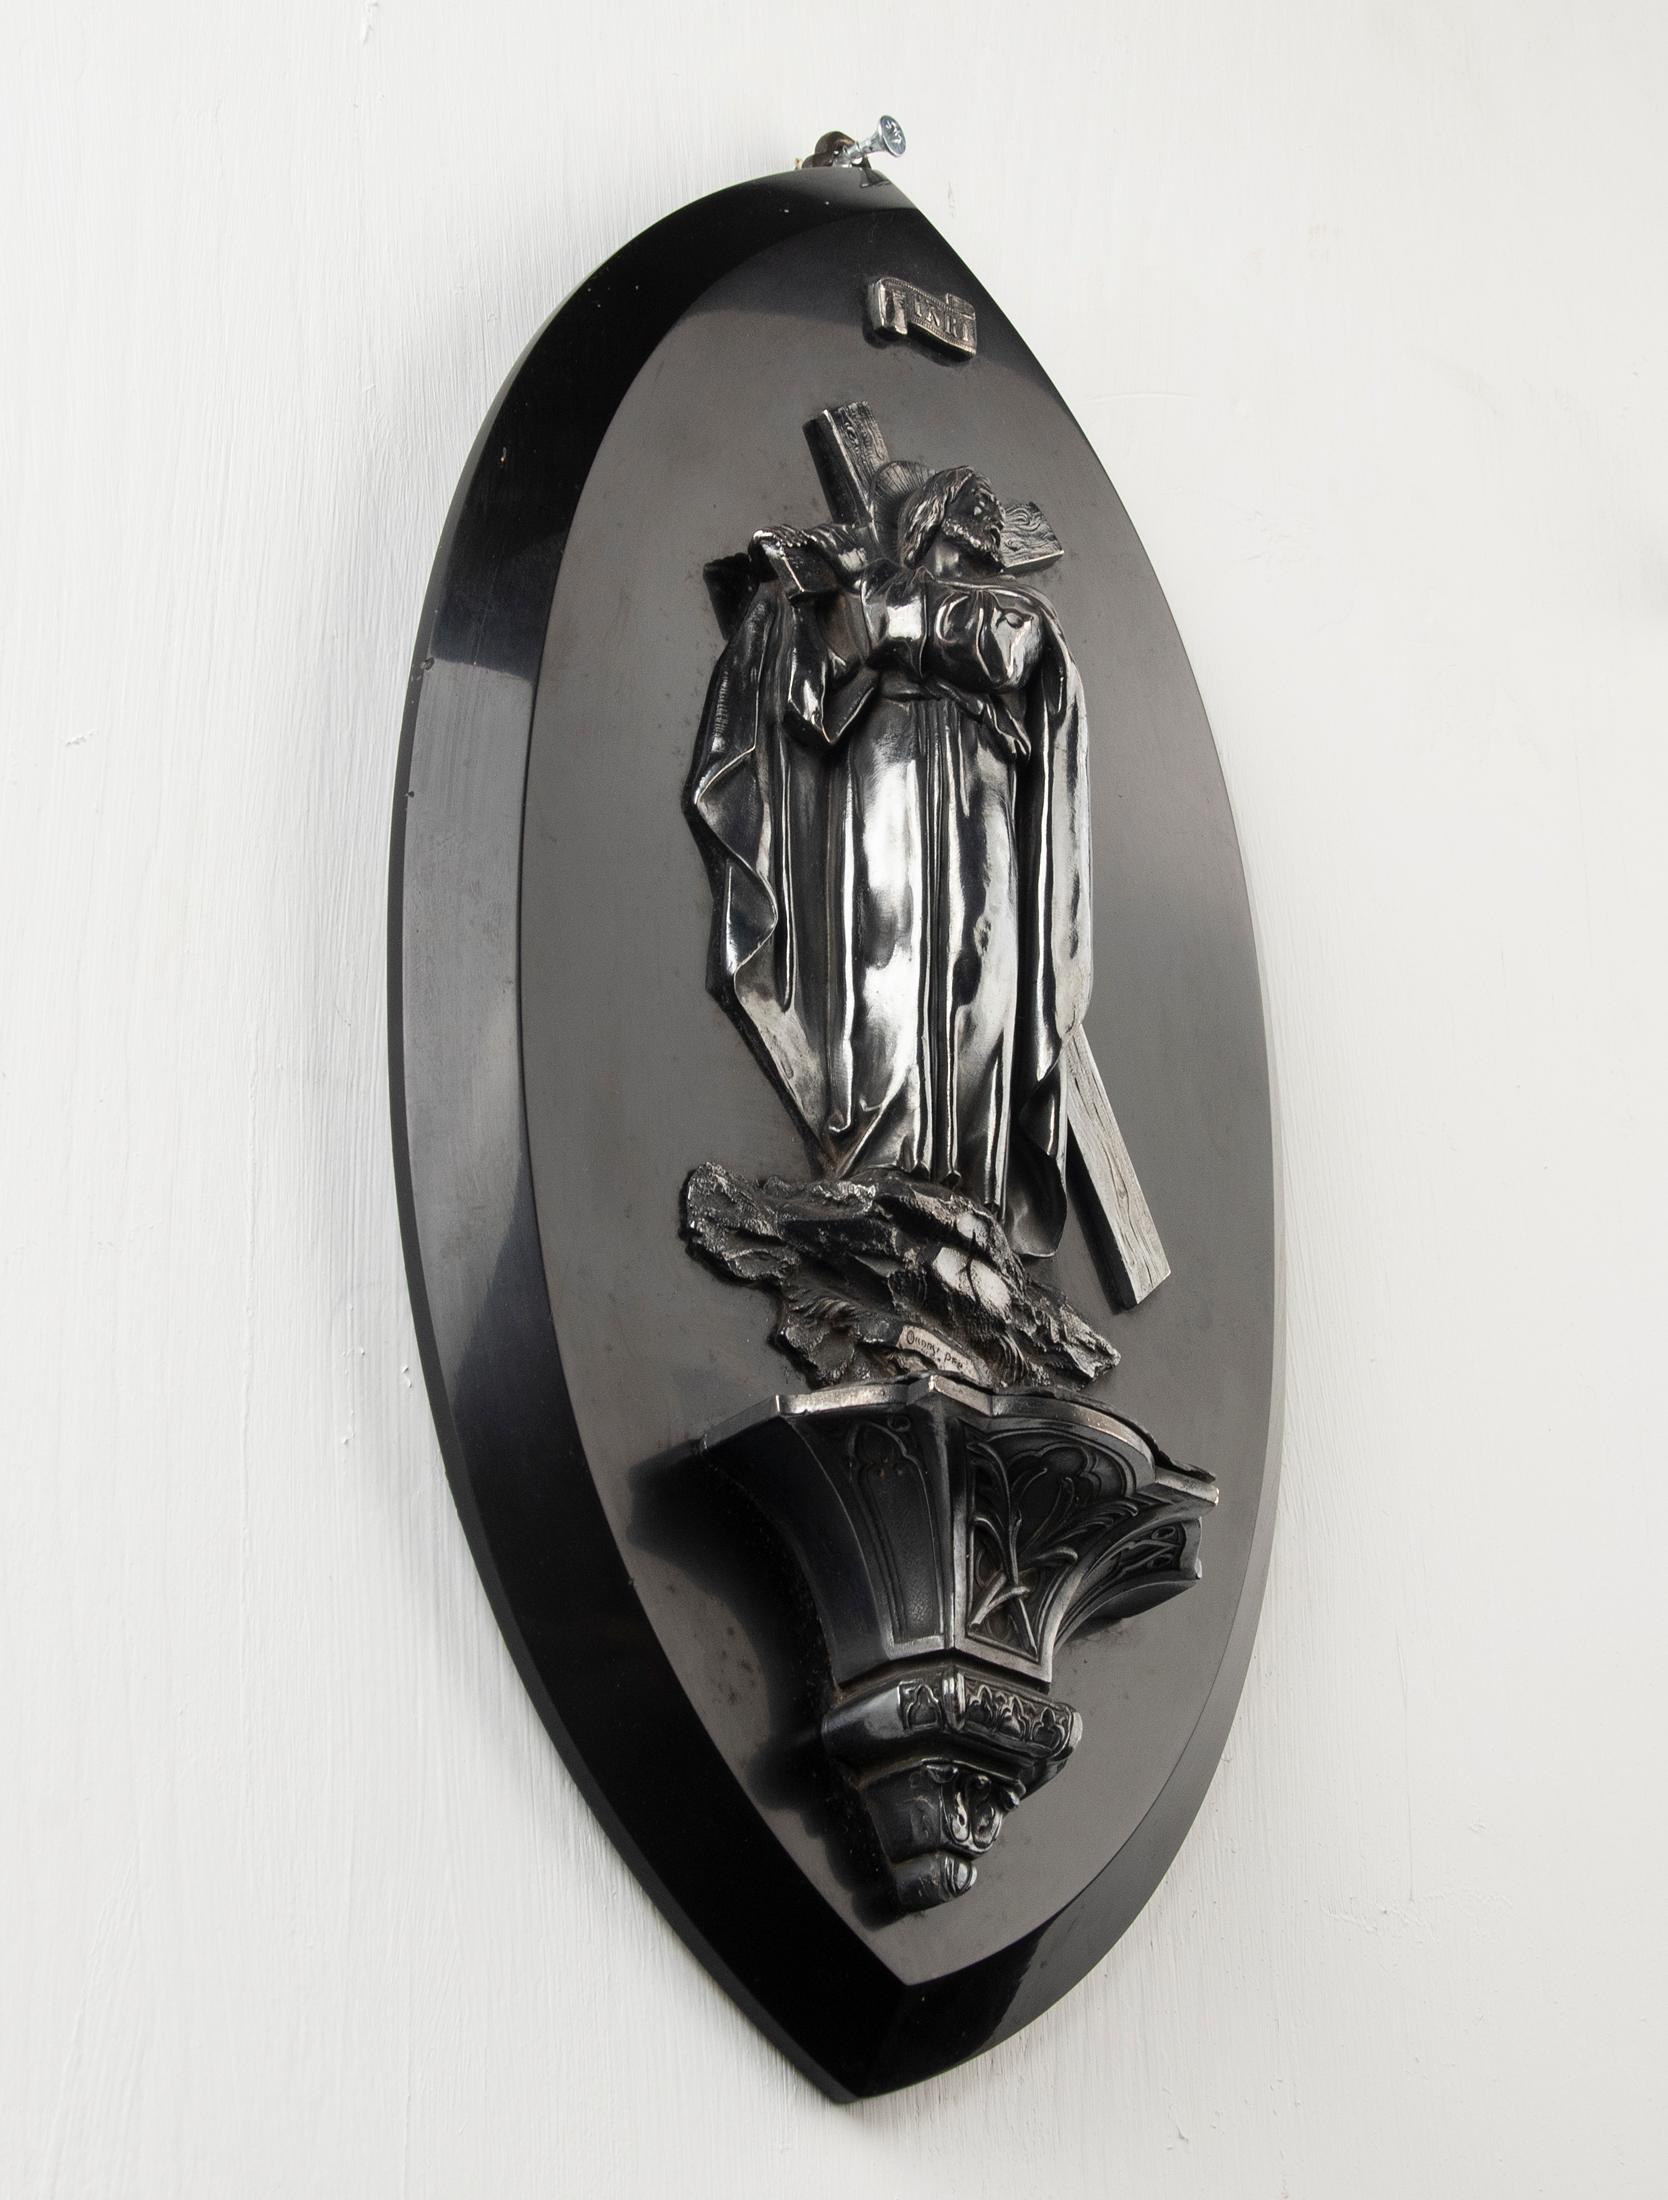 An antique holy water vessel depicting Jesus Christ with the cross on his shoulders. The sculpture is made of silver-plated brass, attached on a black marble panel. The holy water font still has a removable bowl. At the back is a sturdy ring also to